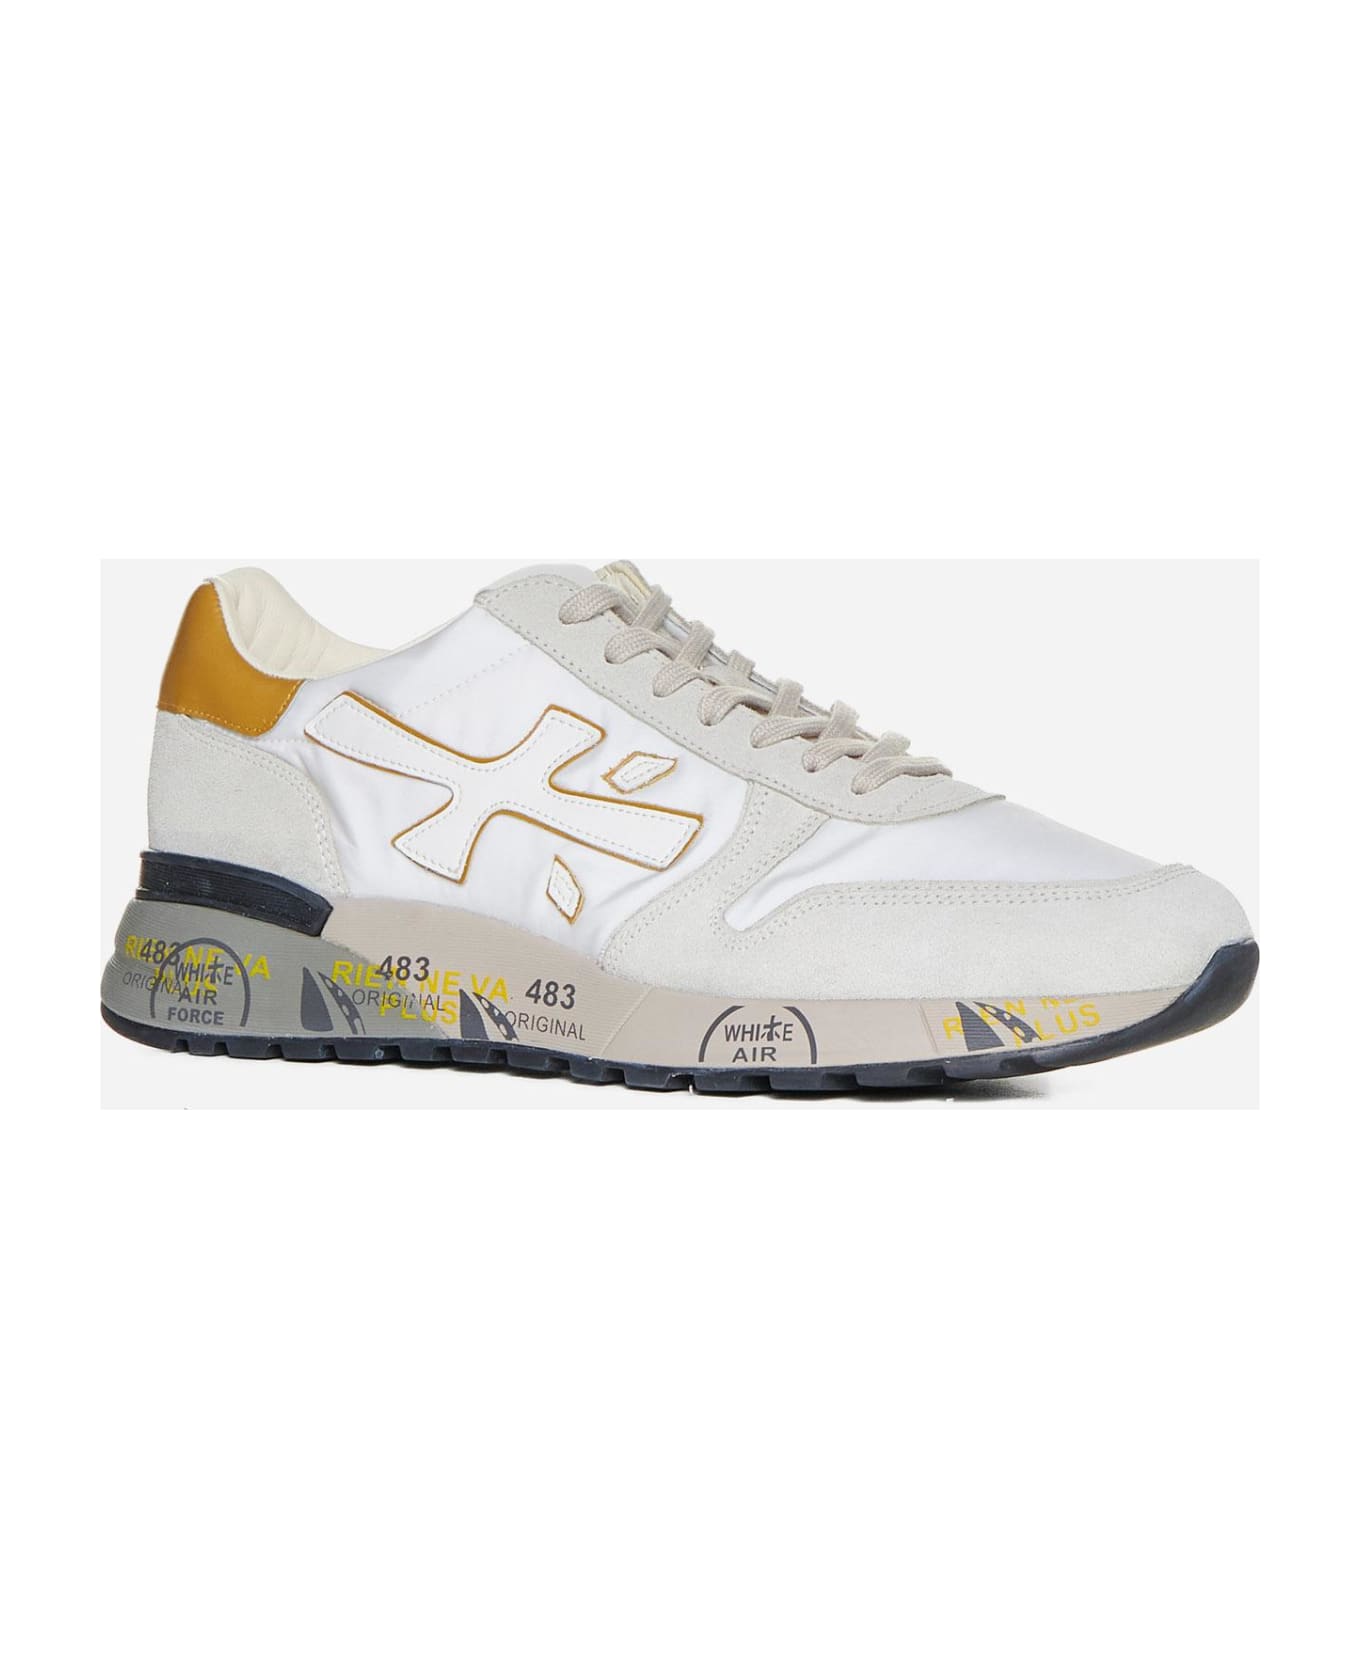 Premiata Mick Suede, Nylon And Leather Sneakers - Offwhite スニーカー